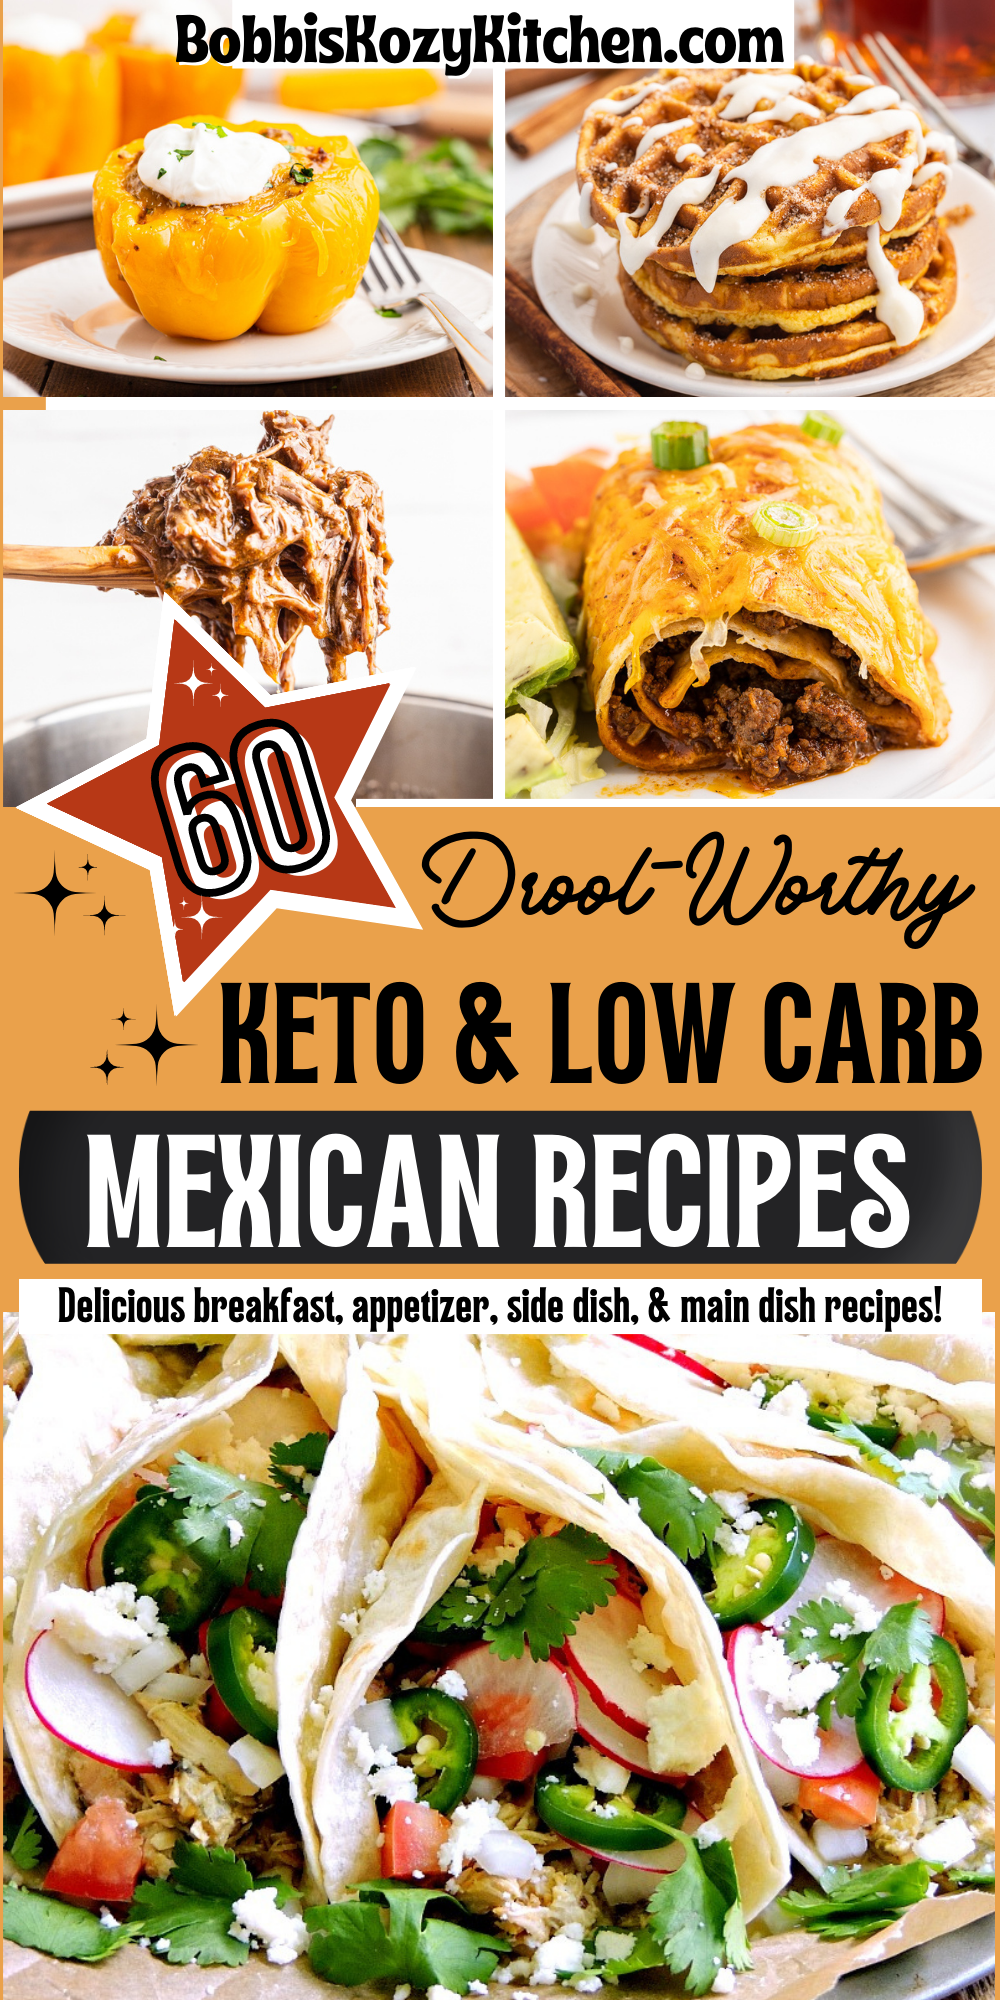 A collage of 5 photos for a 60 Drool-Worthy Keto and Low Carb Recipes collection.